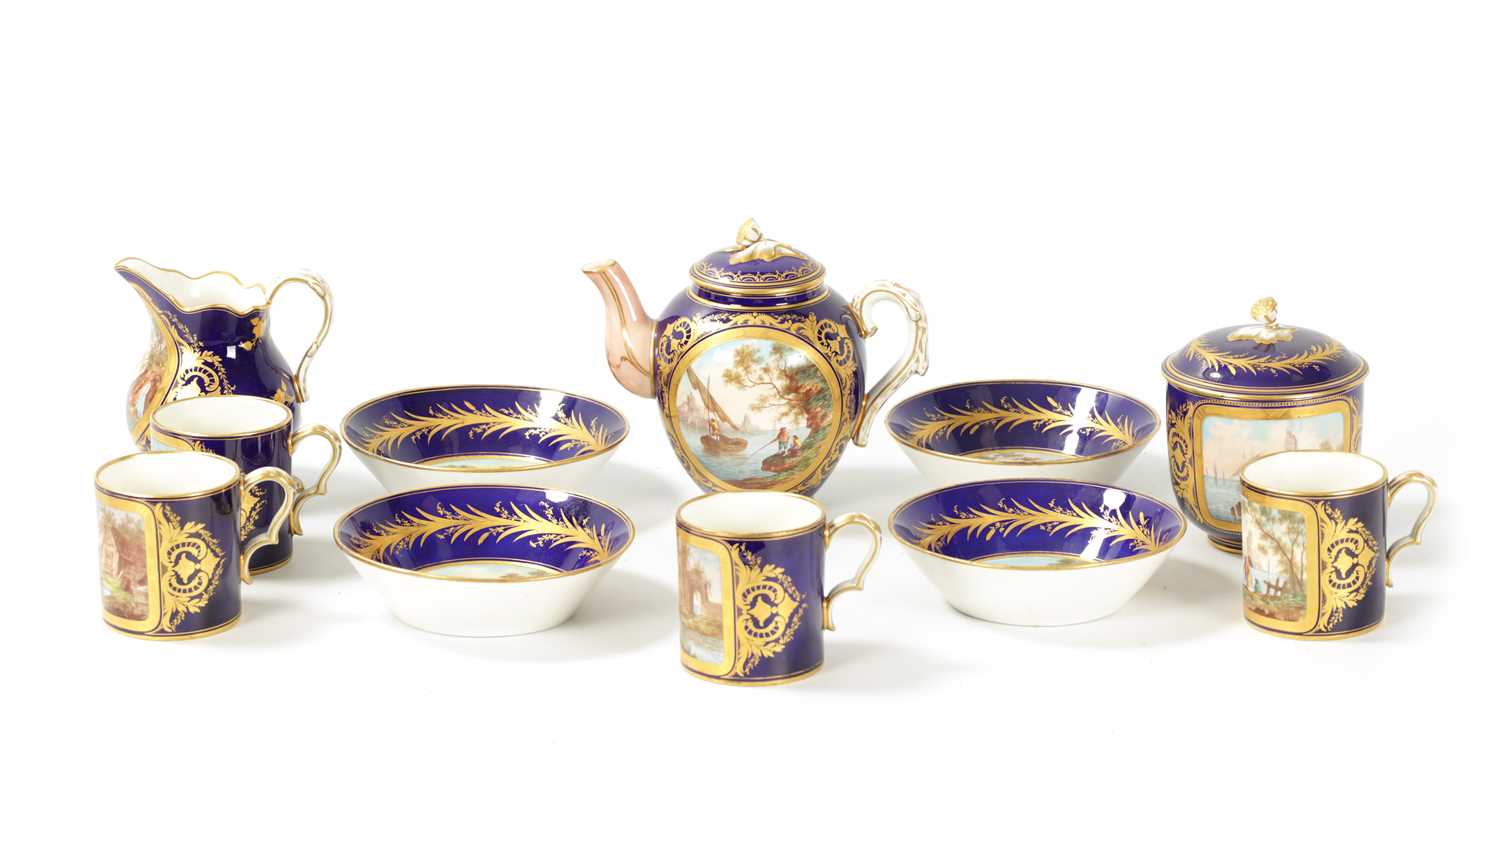 Lot 64 - A FINE 18TH CENTURY SEVRES RICHLY GILT AND ROYAL BLUE GROUND ELEVEN-PIECE CABINET SERVICE